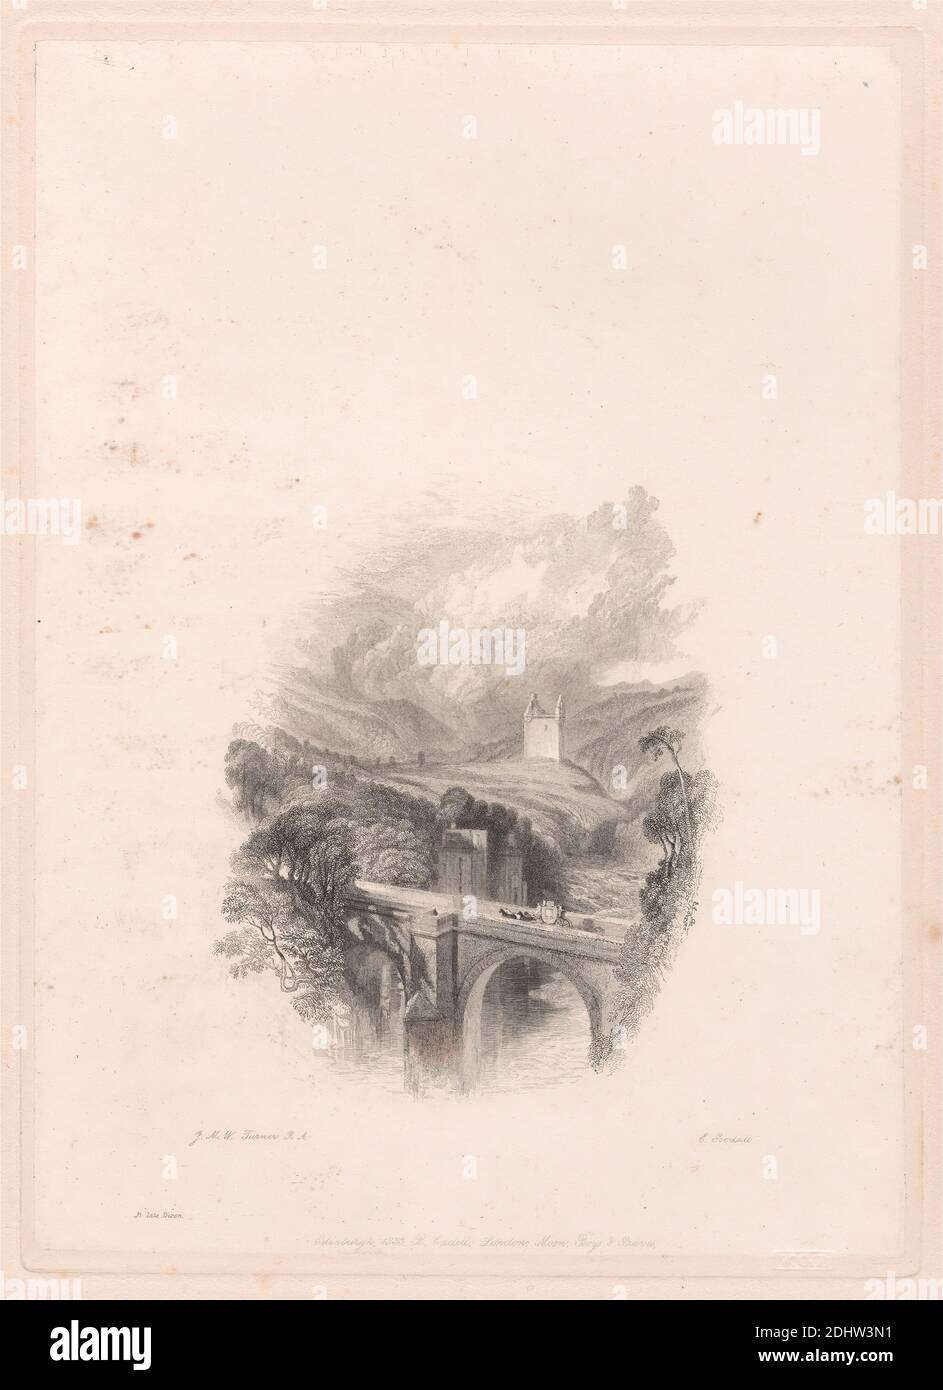 Johnnie Armstrong's Tower, Print made by Edward Goodall, 1795–1870, British, after Joseph Mallord William Turner, 1775–1851, British, 1834, Line engraving on medium, slightly textured, cream wove paper with chine-collé Stock Photo